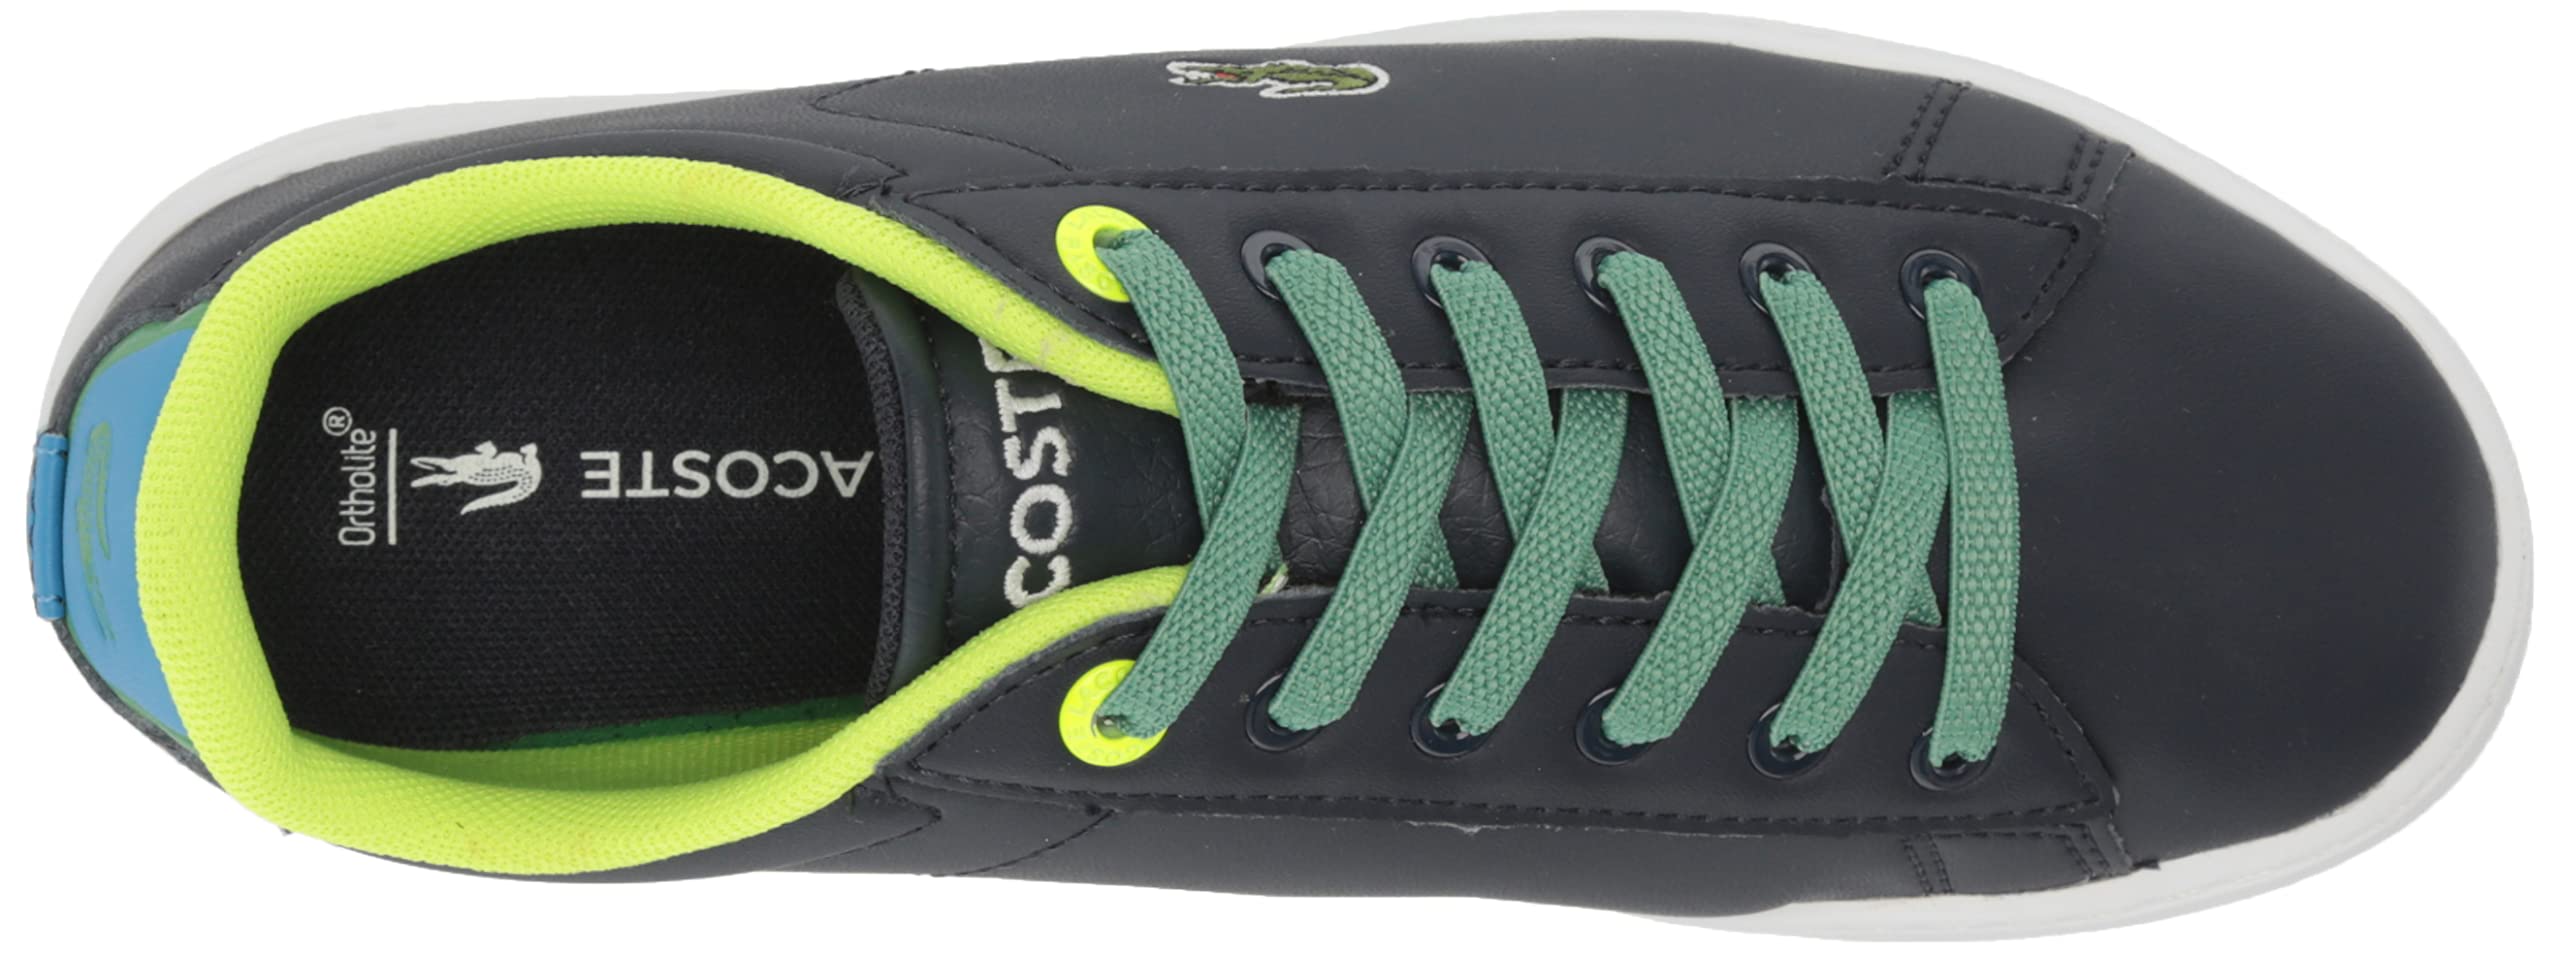 Lacoste - Infants Carnaby Synthetic Colour Block Sneakers